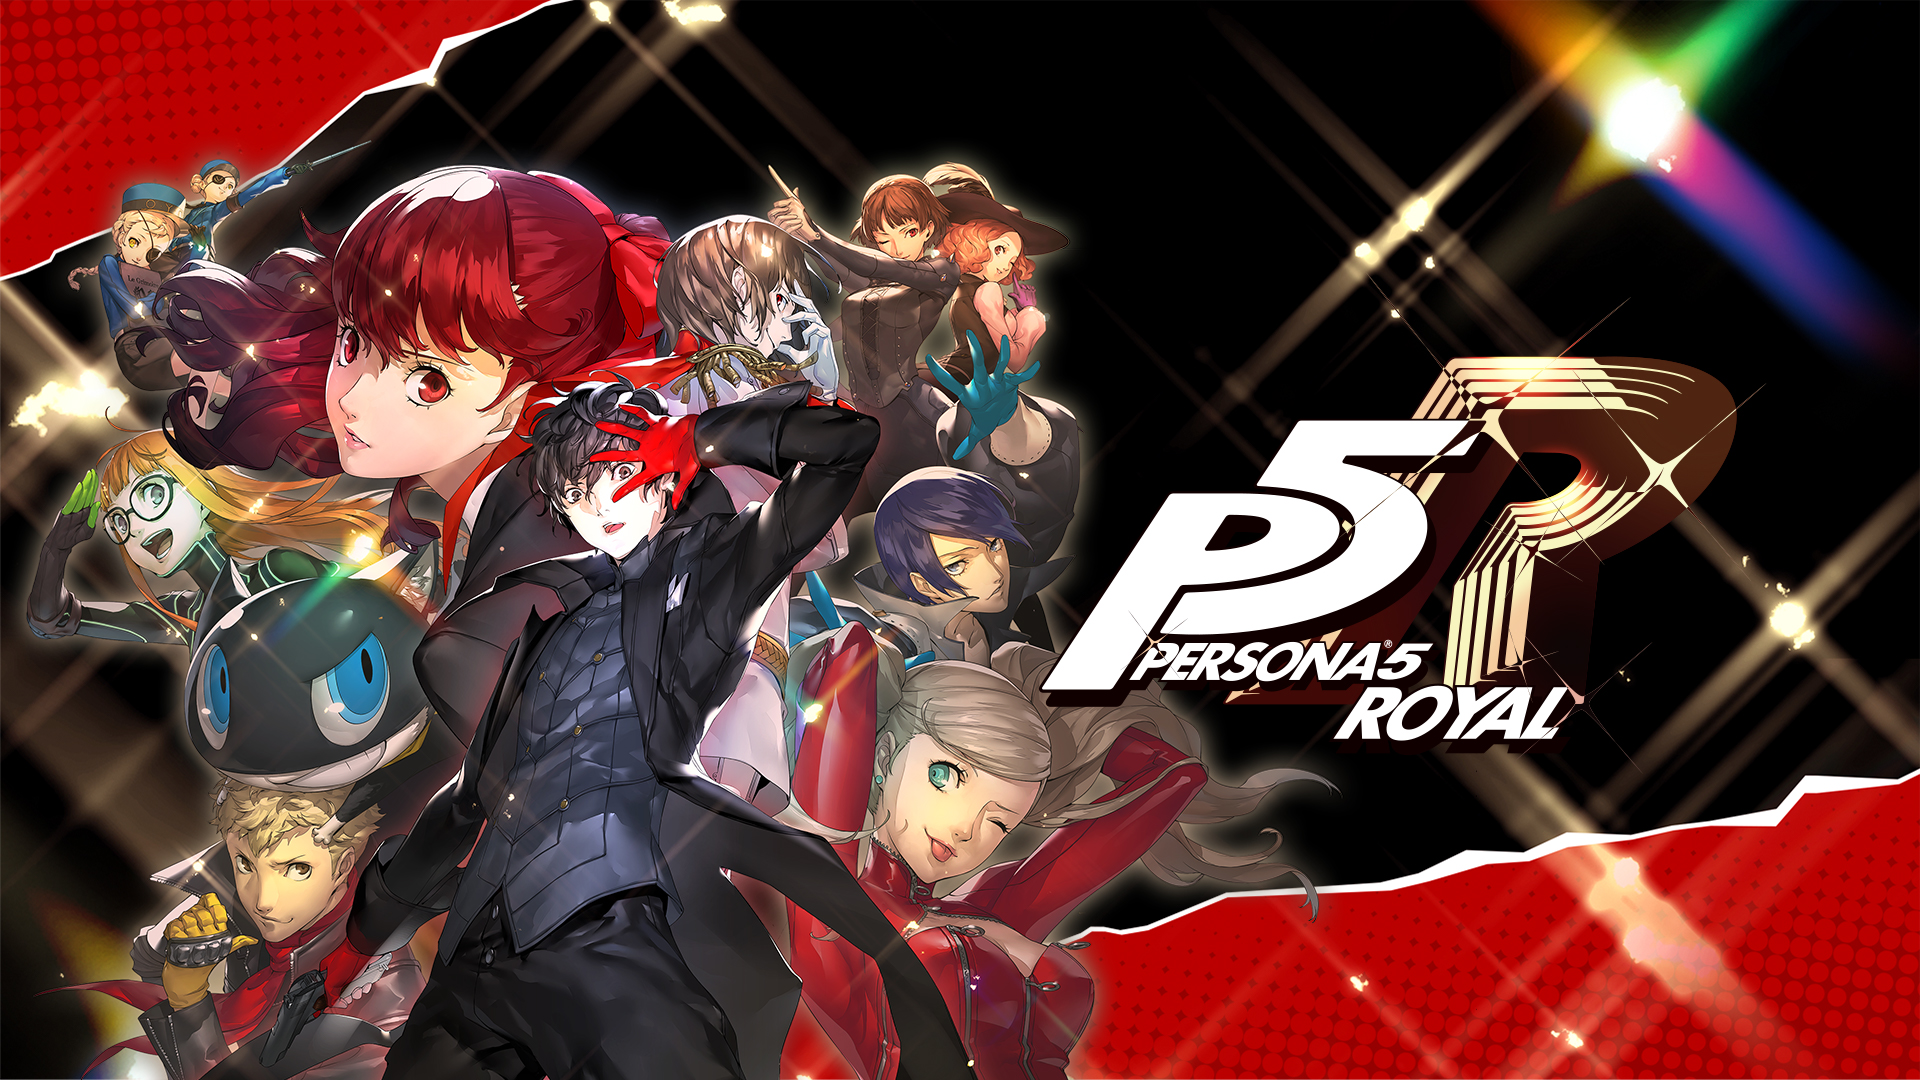 Persona Series Coming Soon to Xbox One, Xbox Series X|S, Windows PC, and with Xbox Game Pass